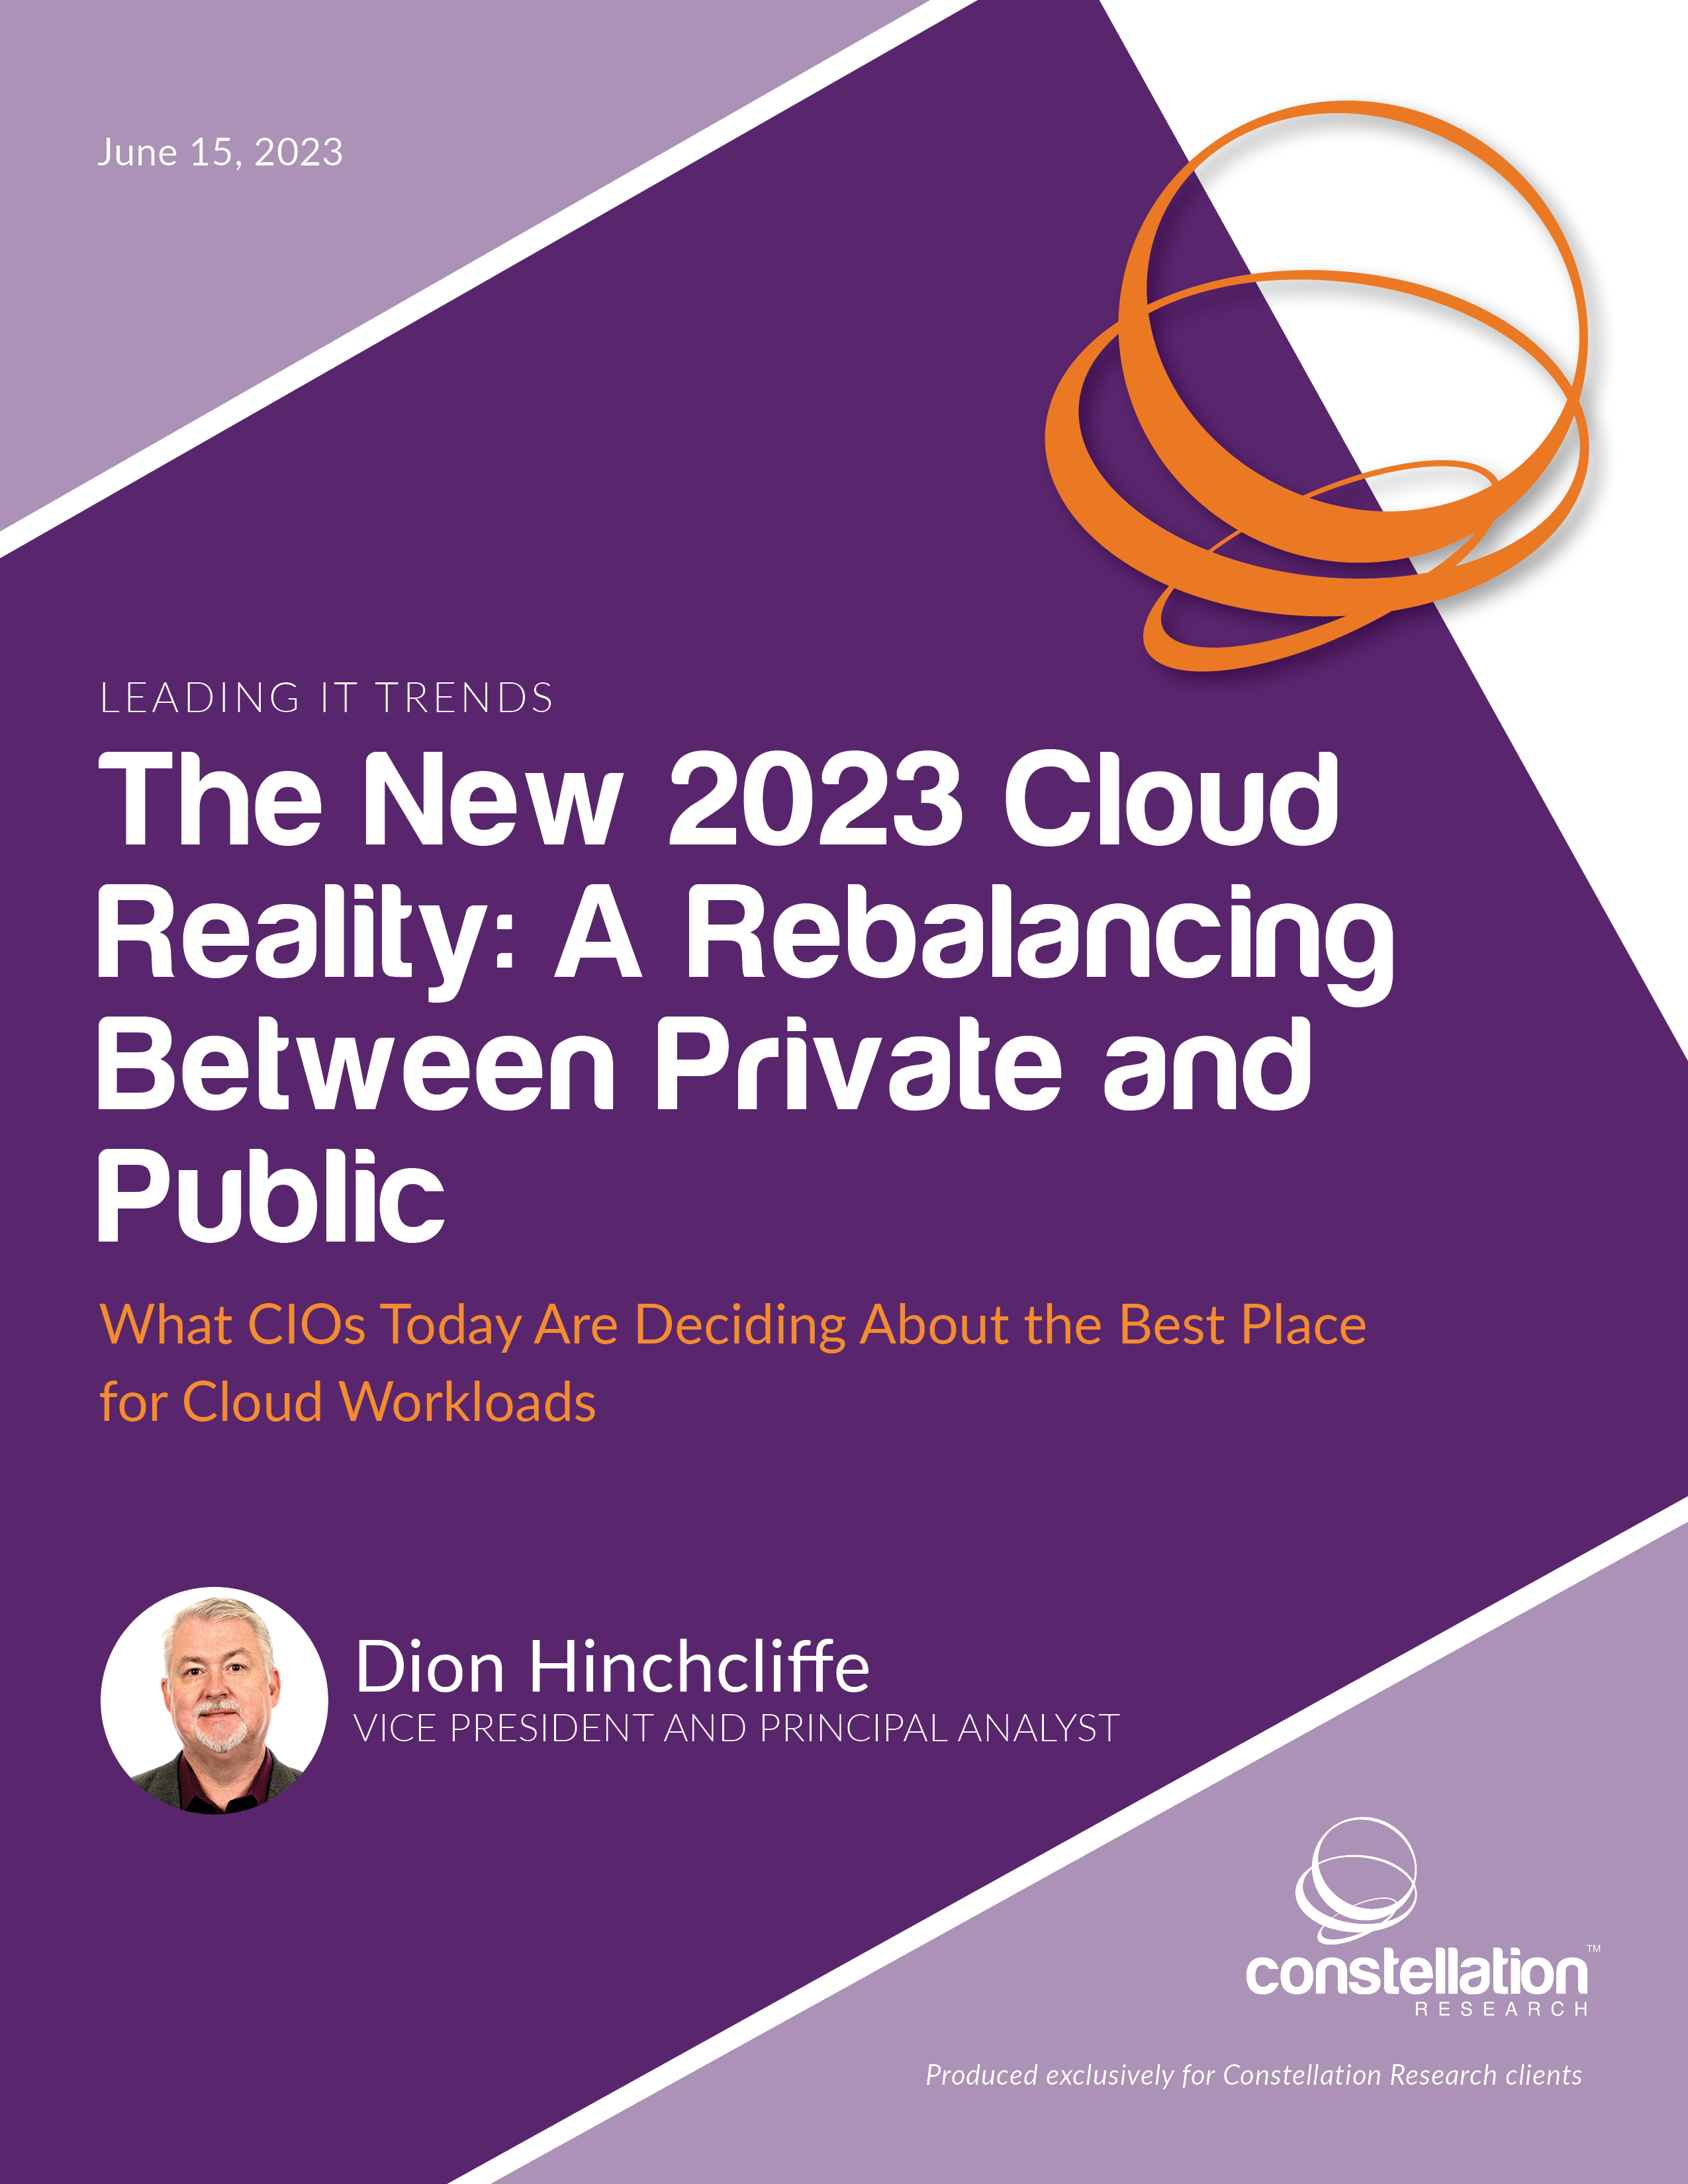 The New 2023 Cloud Reality: A Rebalancing Between Private and Public by Dion Hinchcliffe